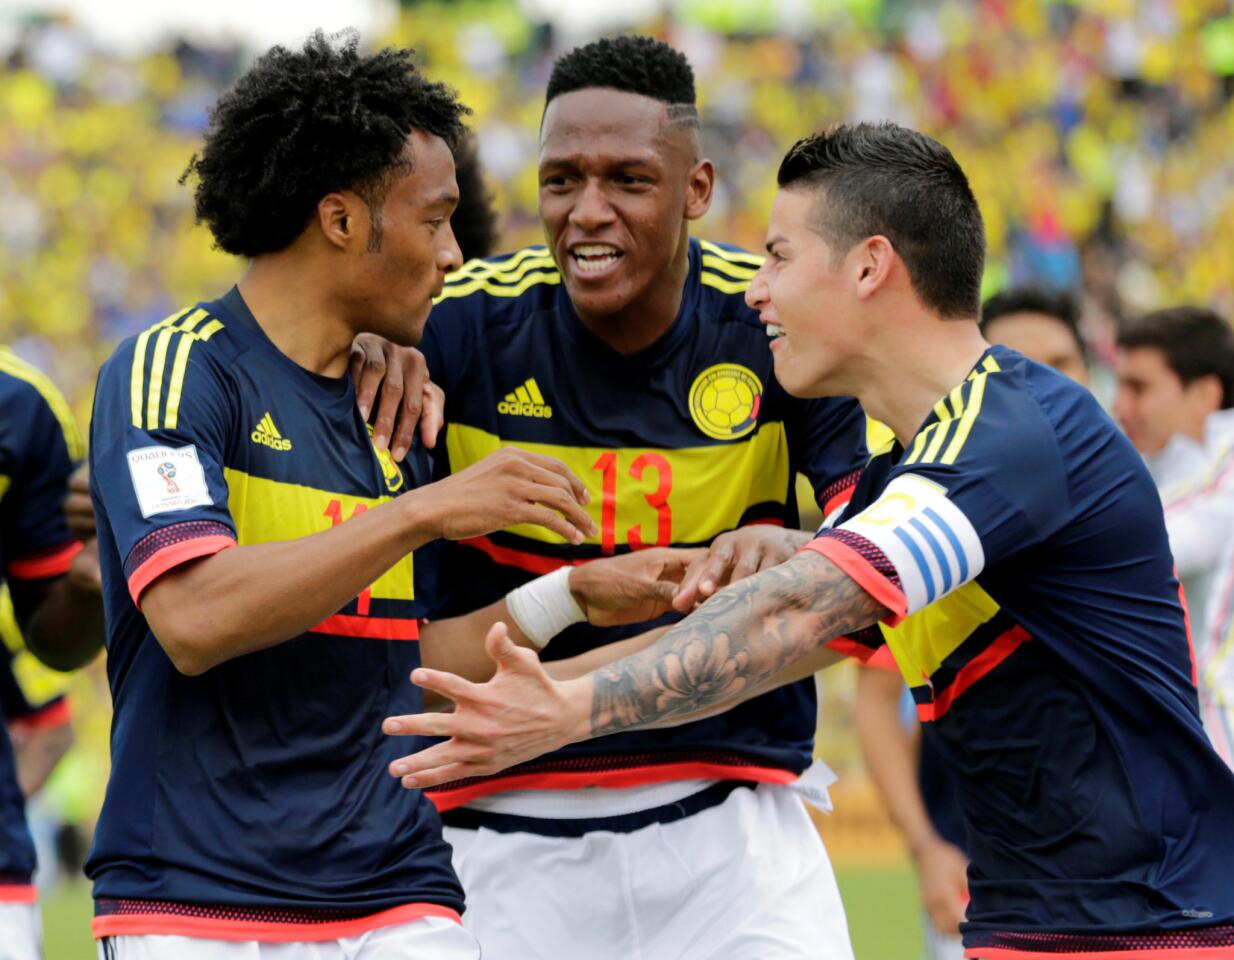 Football Soccer- Ecuador v Colombia- World Cup 2018 Qualifiers - Quito, Ecuador - 28/3/17. Colombia's Juan Cuadrado (L) celebrates with teammates after scoring against Ecuador. REUTERS/Henry Romero ** Usable by SD ONLY **